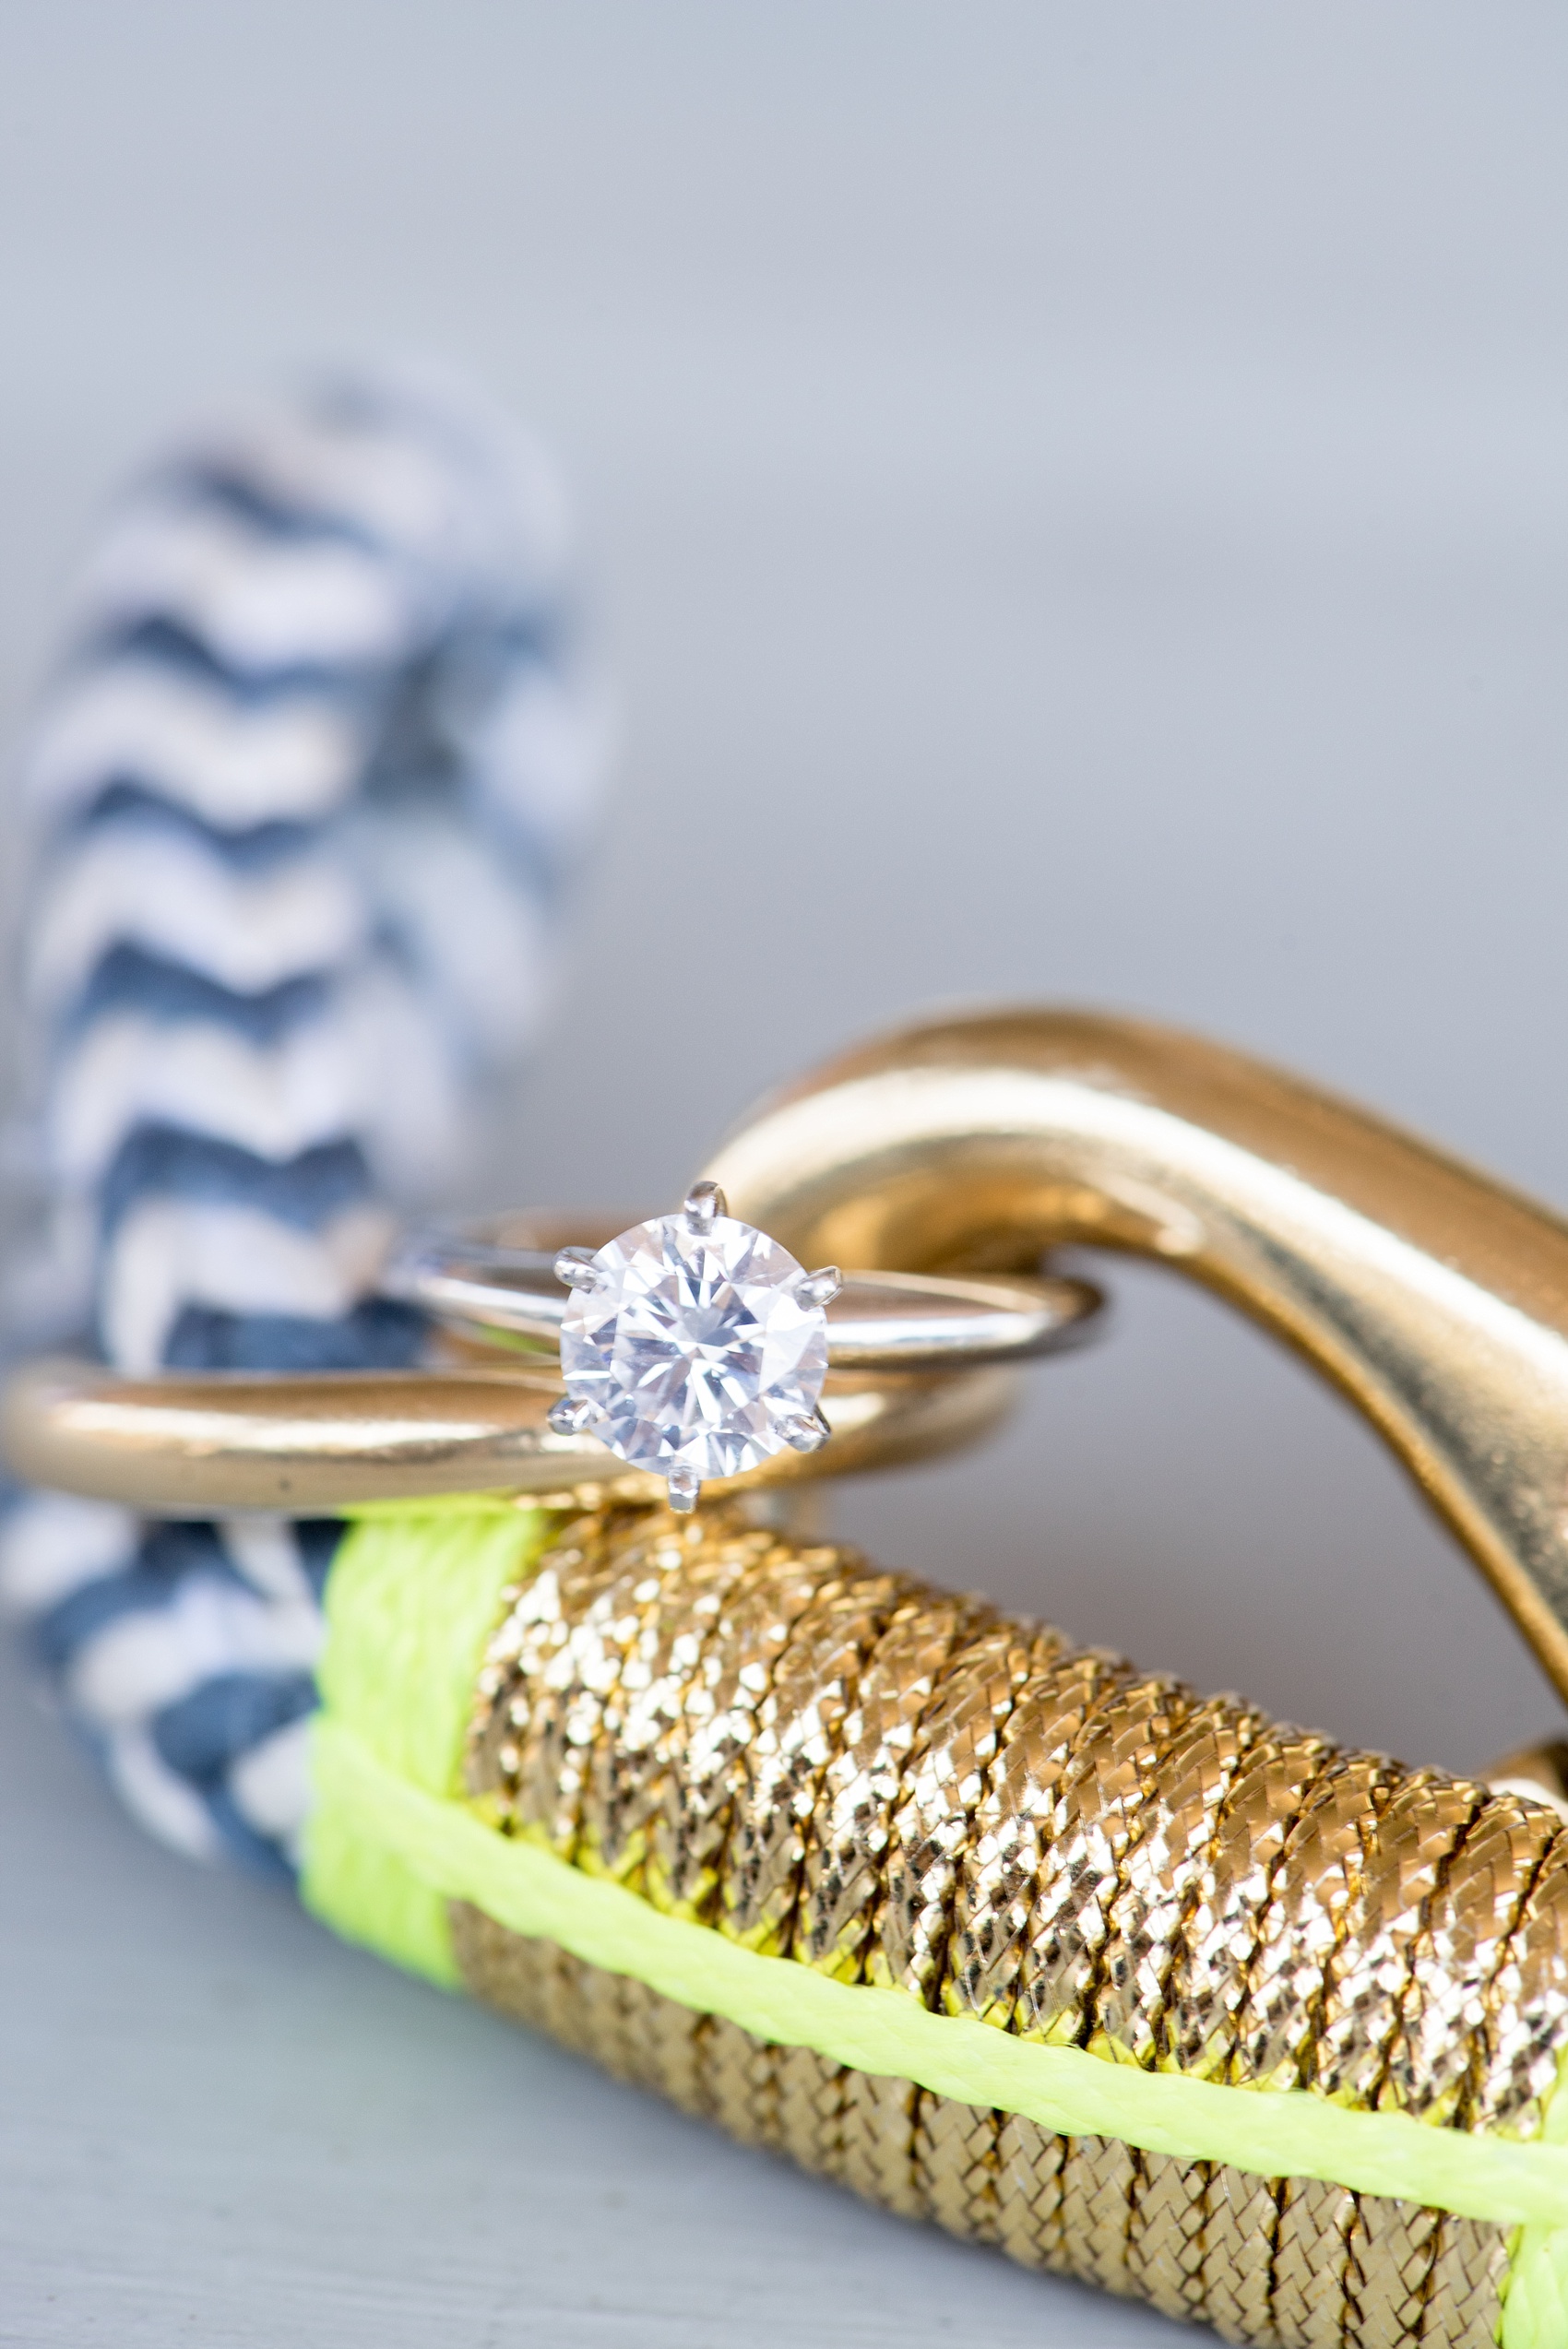 Mikkel Paige Photography captures a Bay Head, NJ engagement session with a solitaire white gold diamond ring.